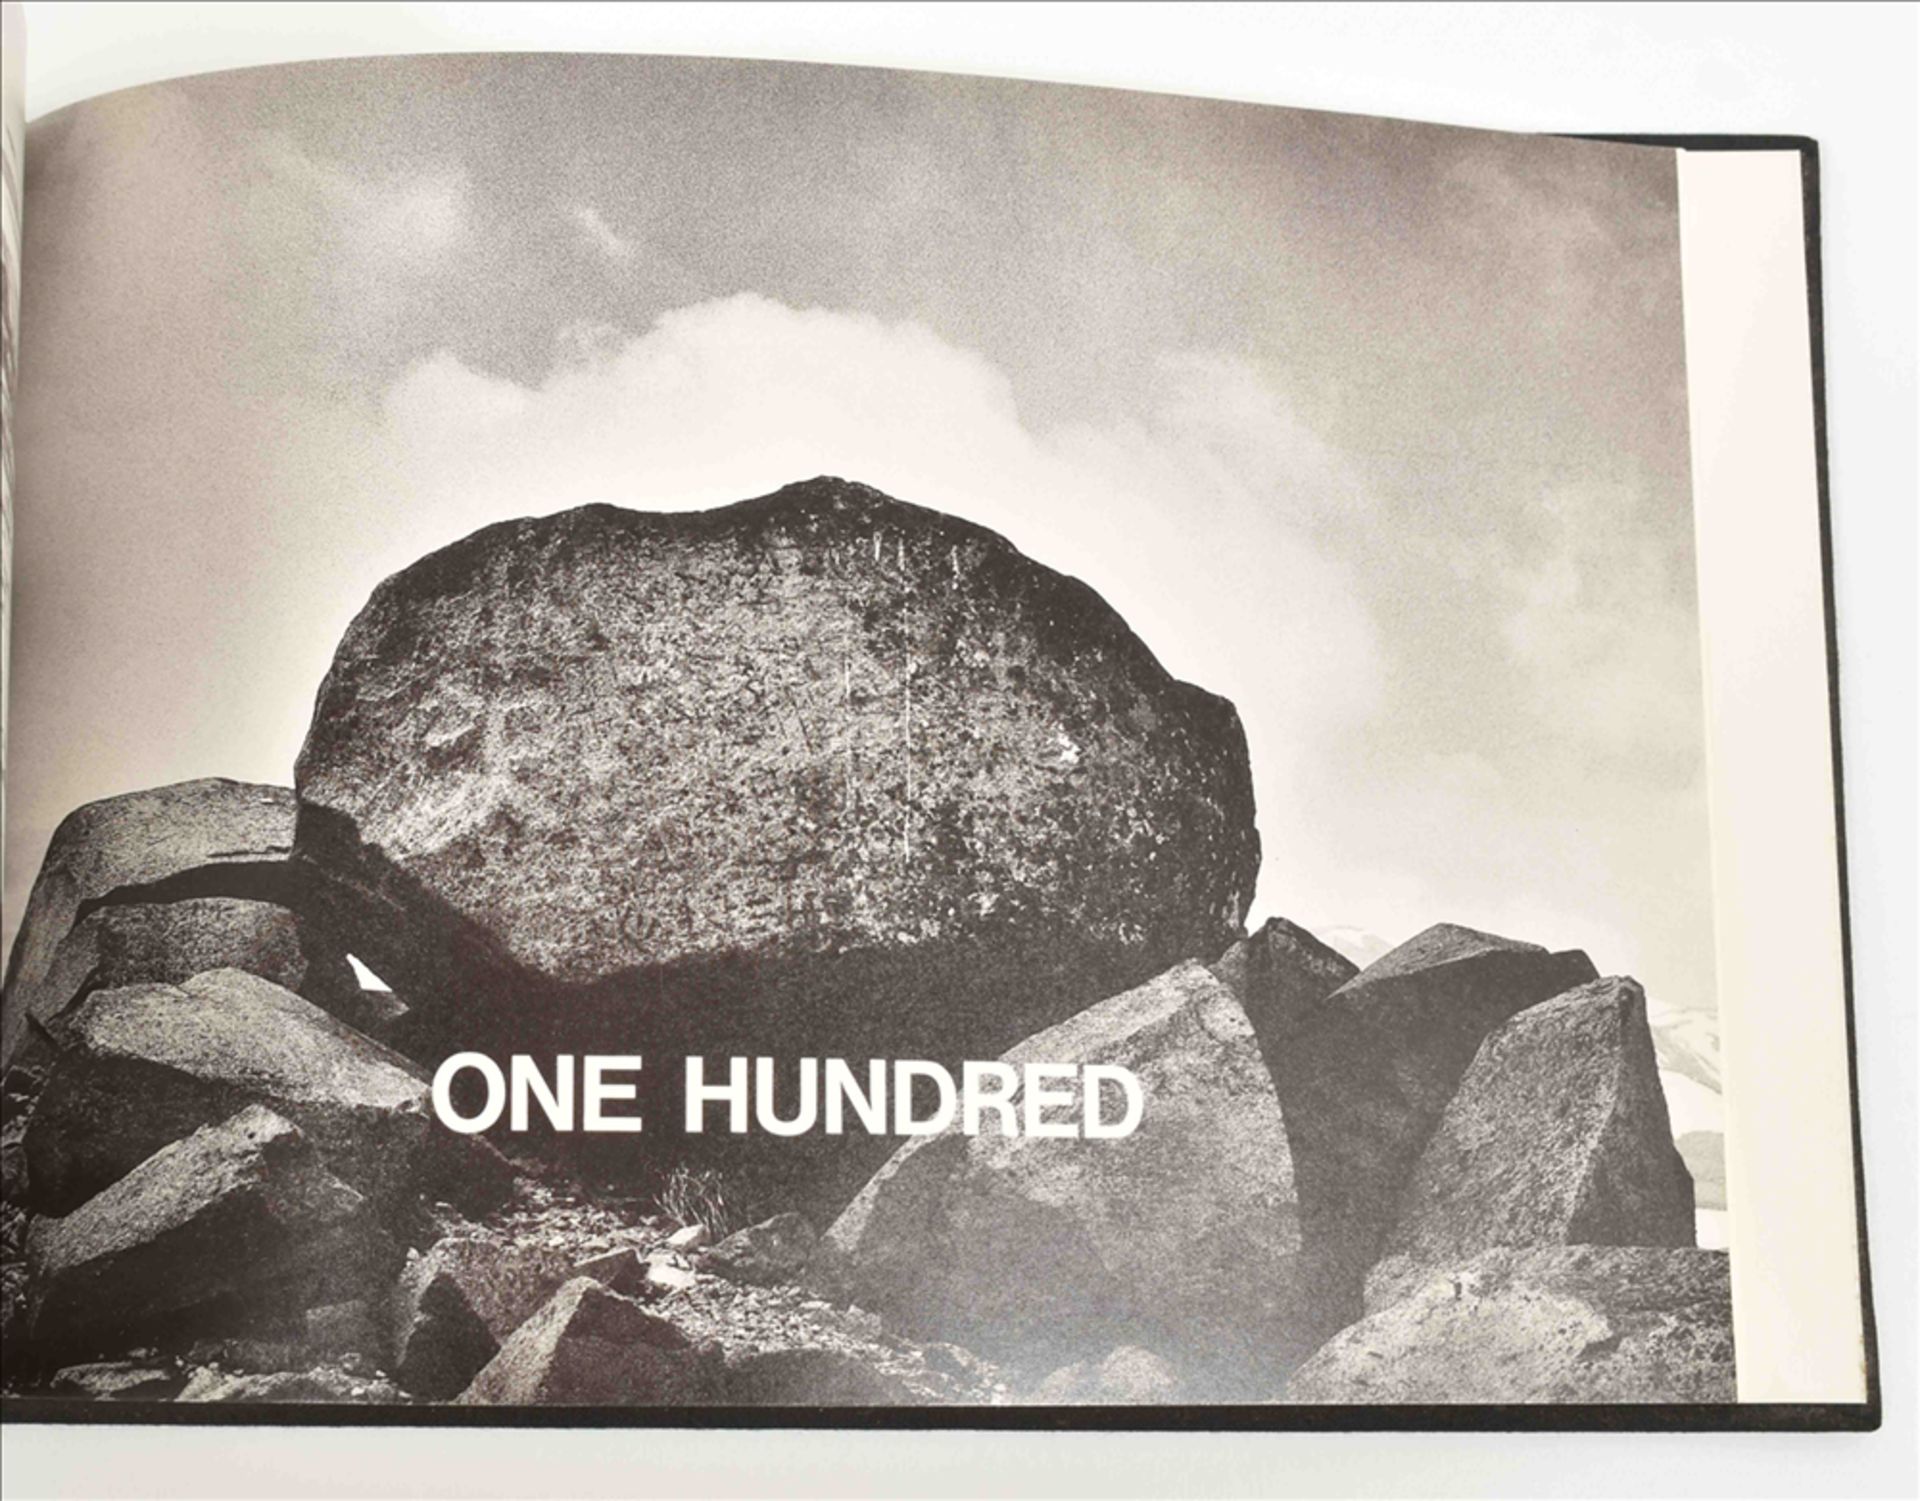 Hamish Fulton, Touching by hand one hundred rocks - Image 7 of 7